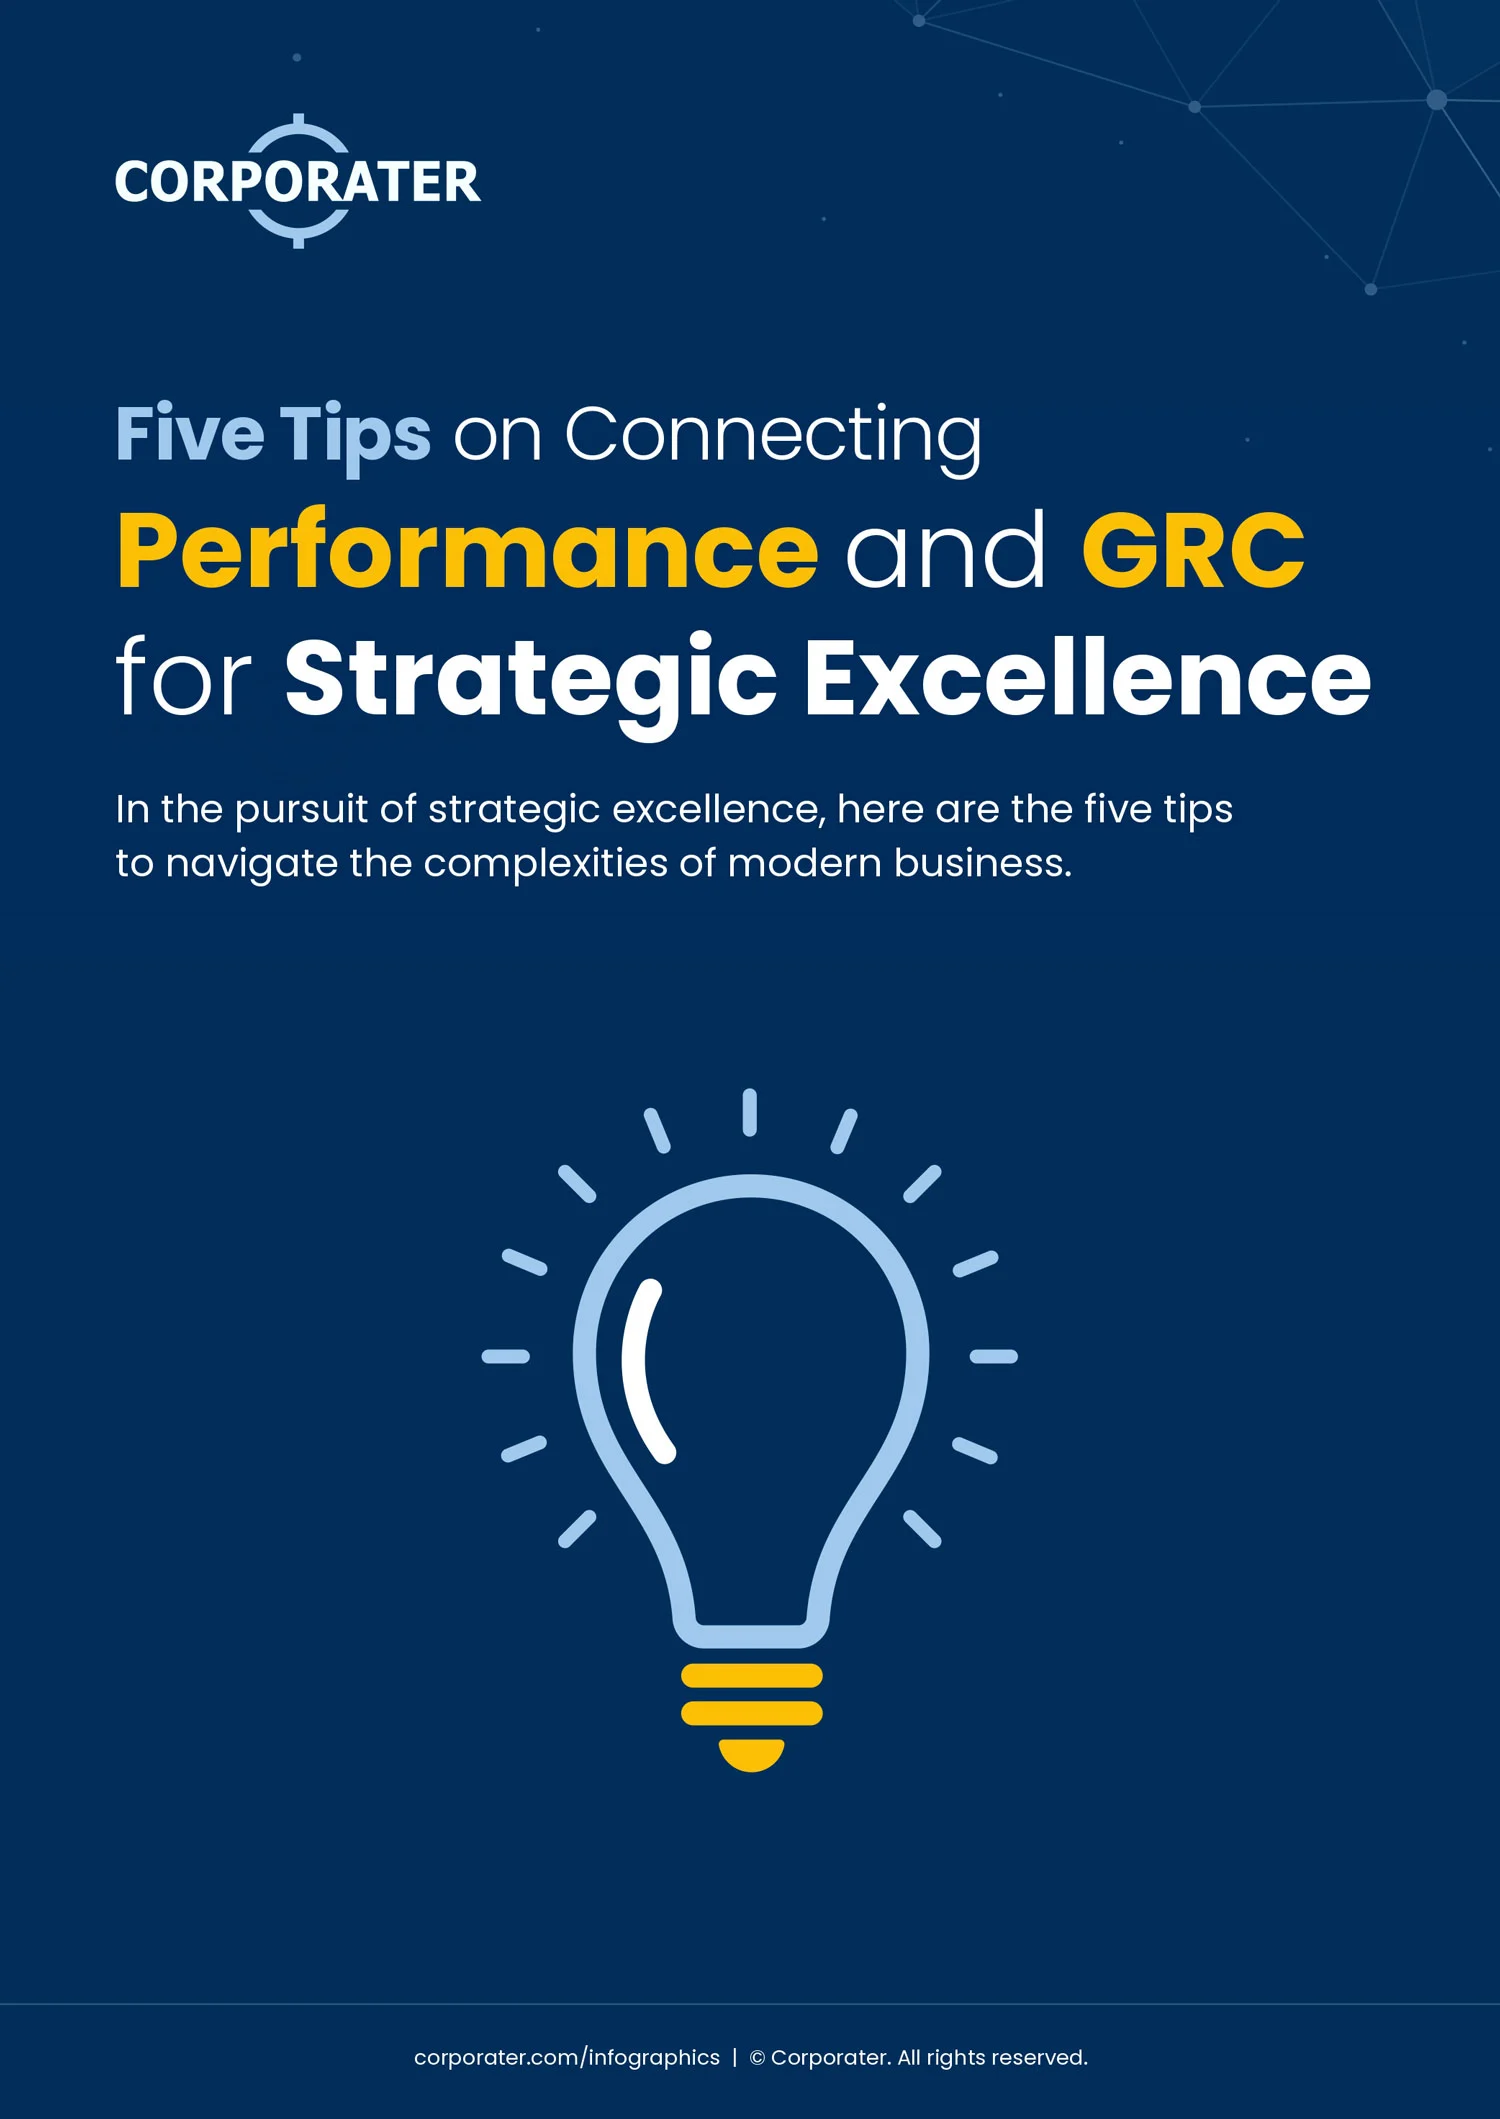 Five-Tips-on-Connecting-Performance-and-GRC-for-Strategic-Excellence_image